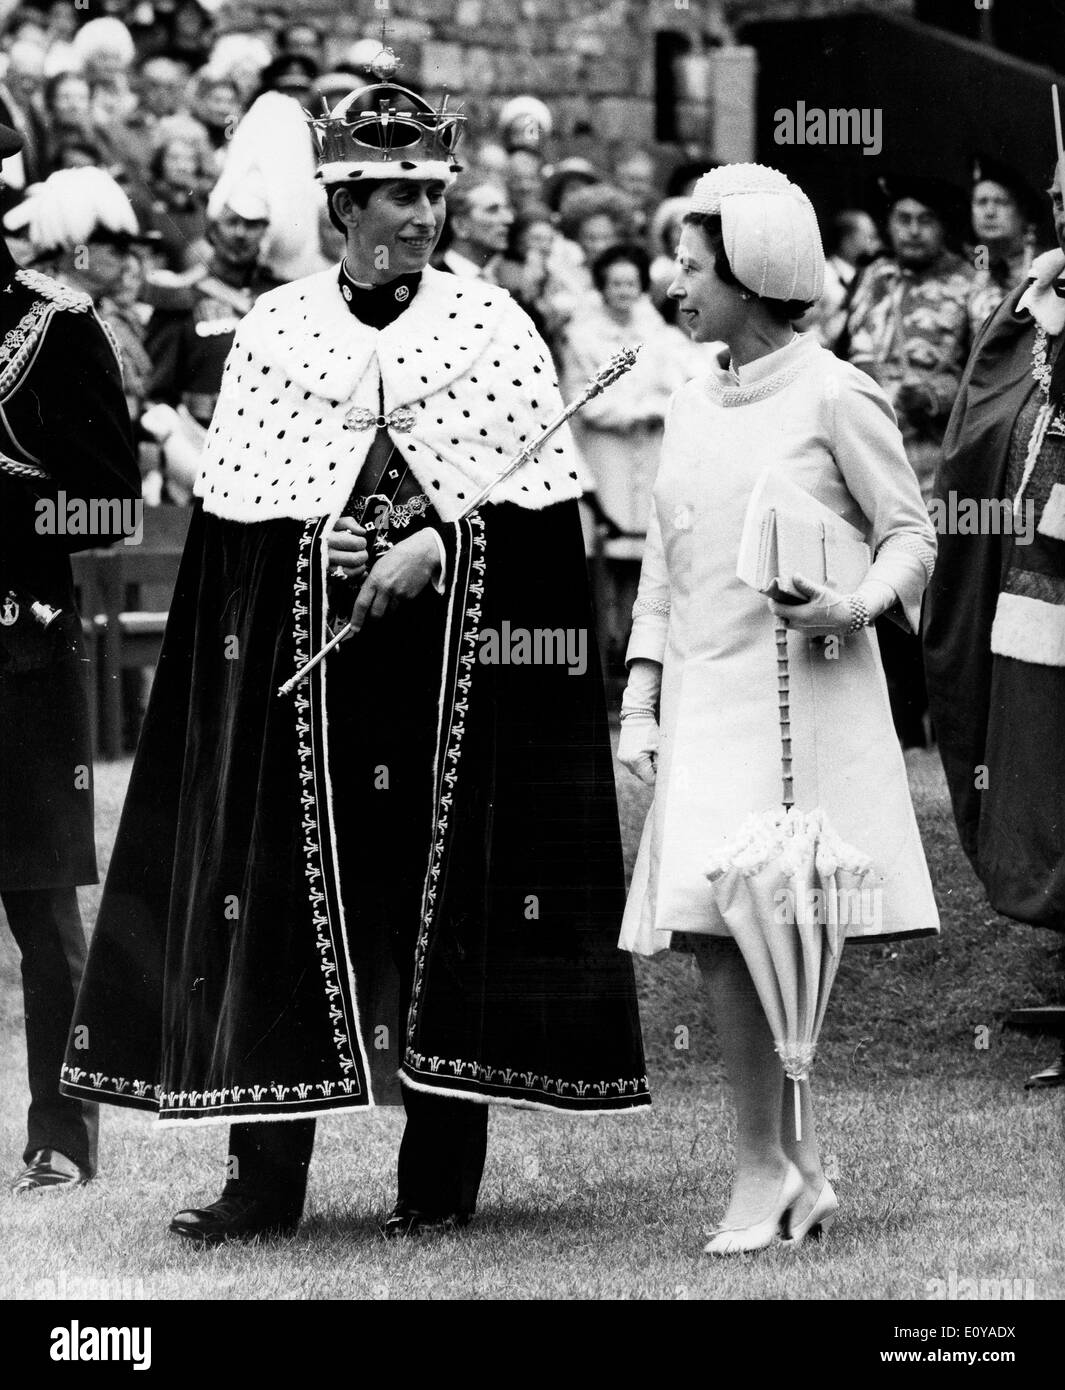 Prince Charles with Elizabeth II at crowning ceremony Stock Photo - Alamy